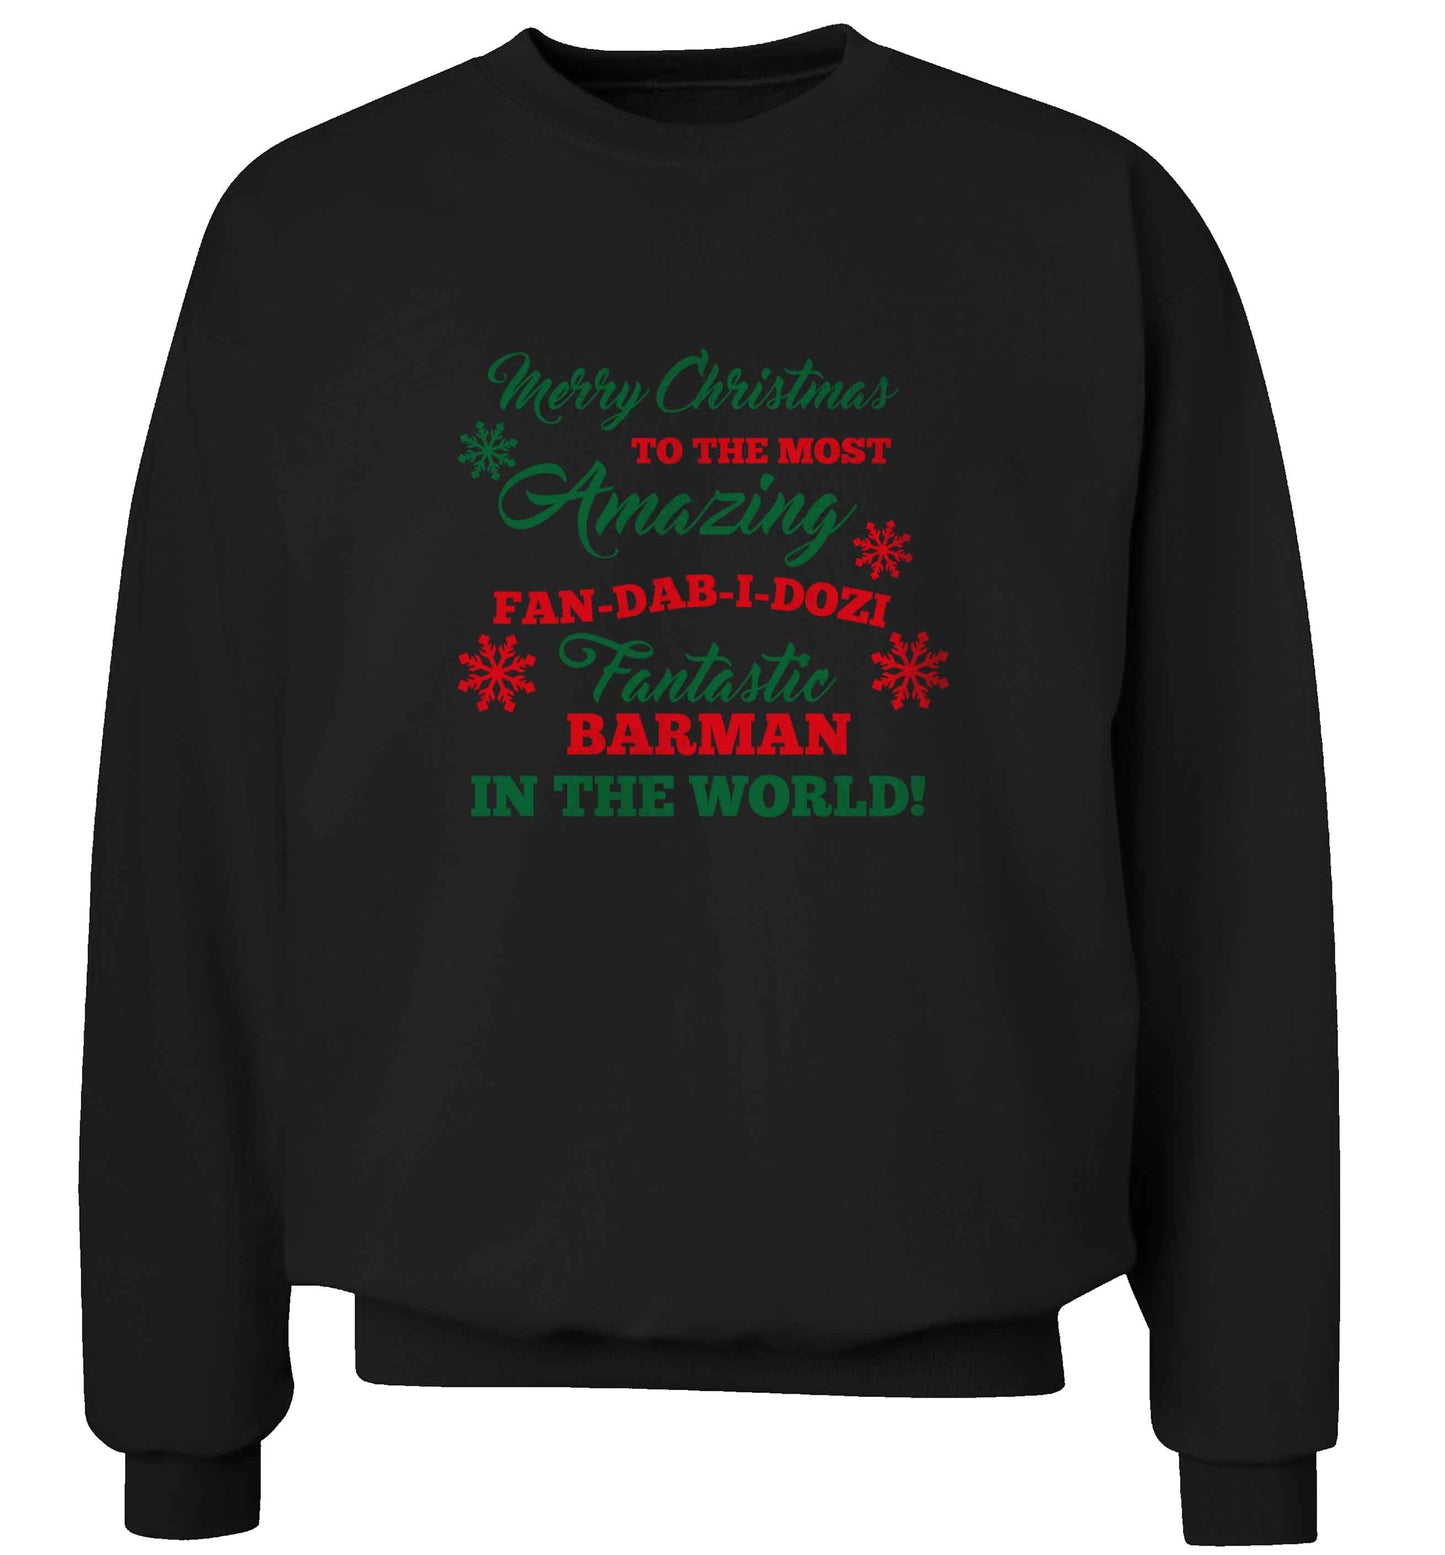 Merry Christmas to the most amazing barman in the world! adult's unisex black sweater 2XL